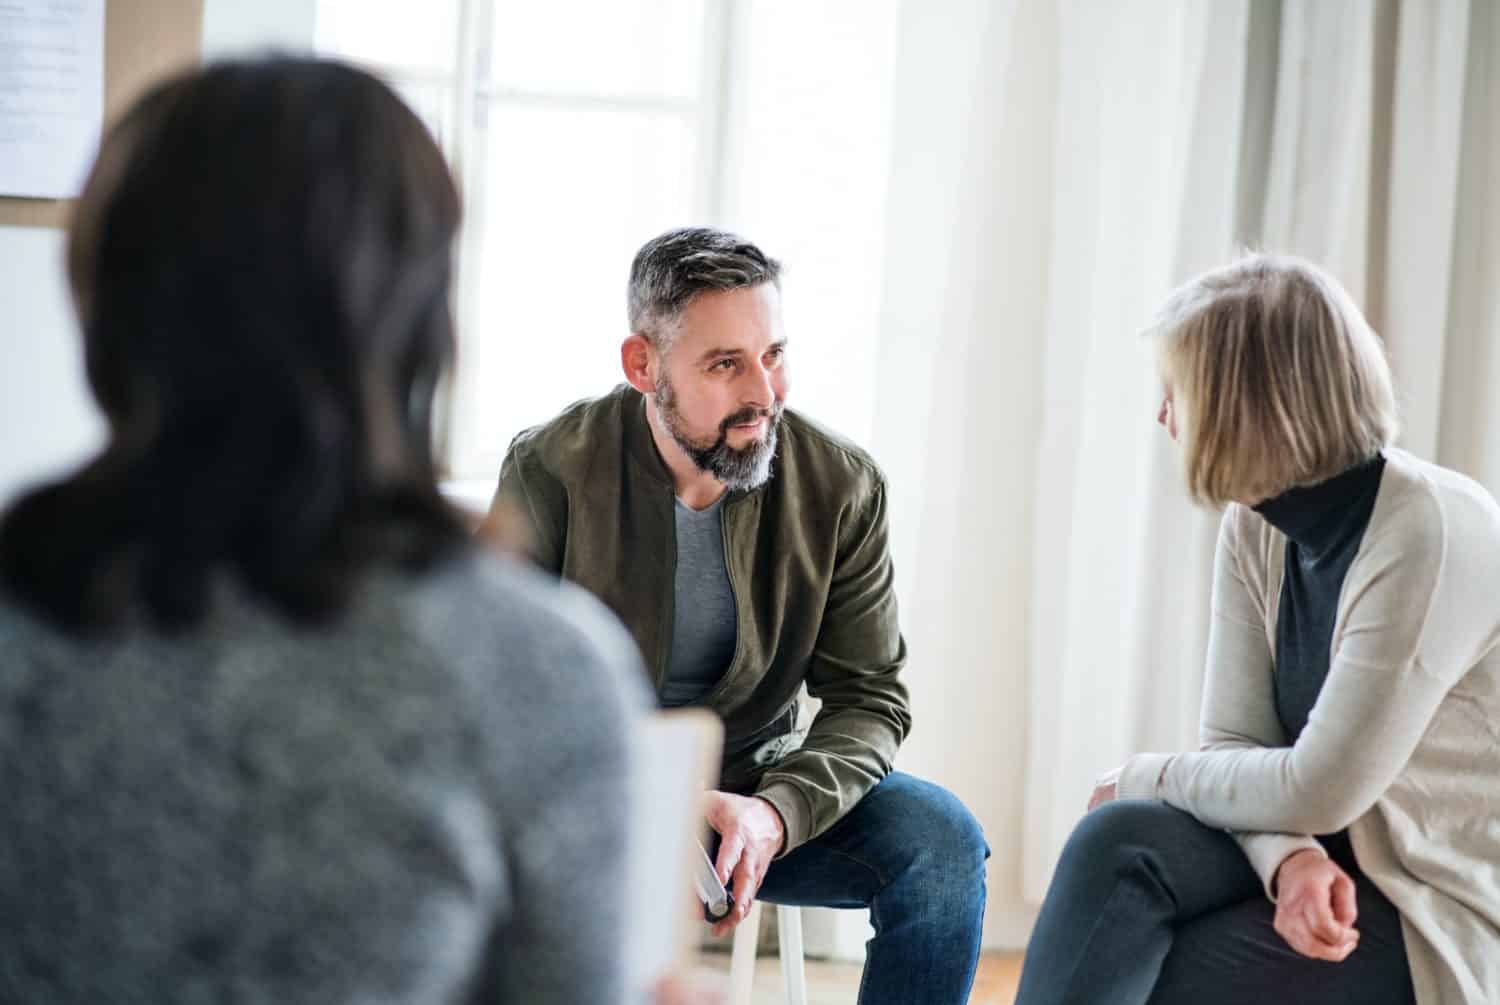 Man and women sitting in a circle during group therapy, talking.